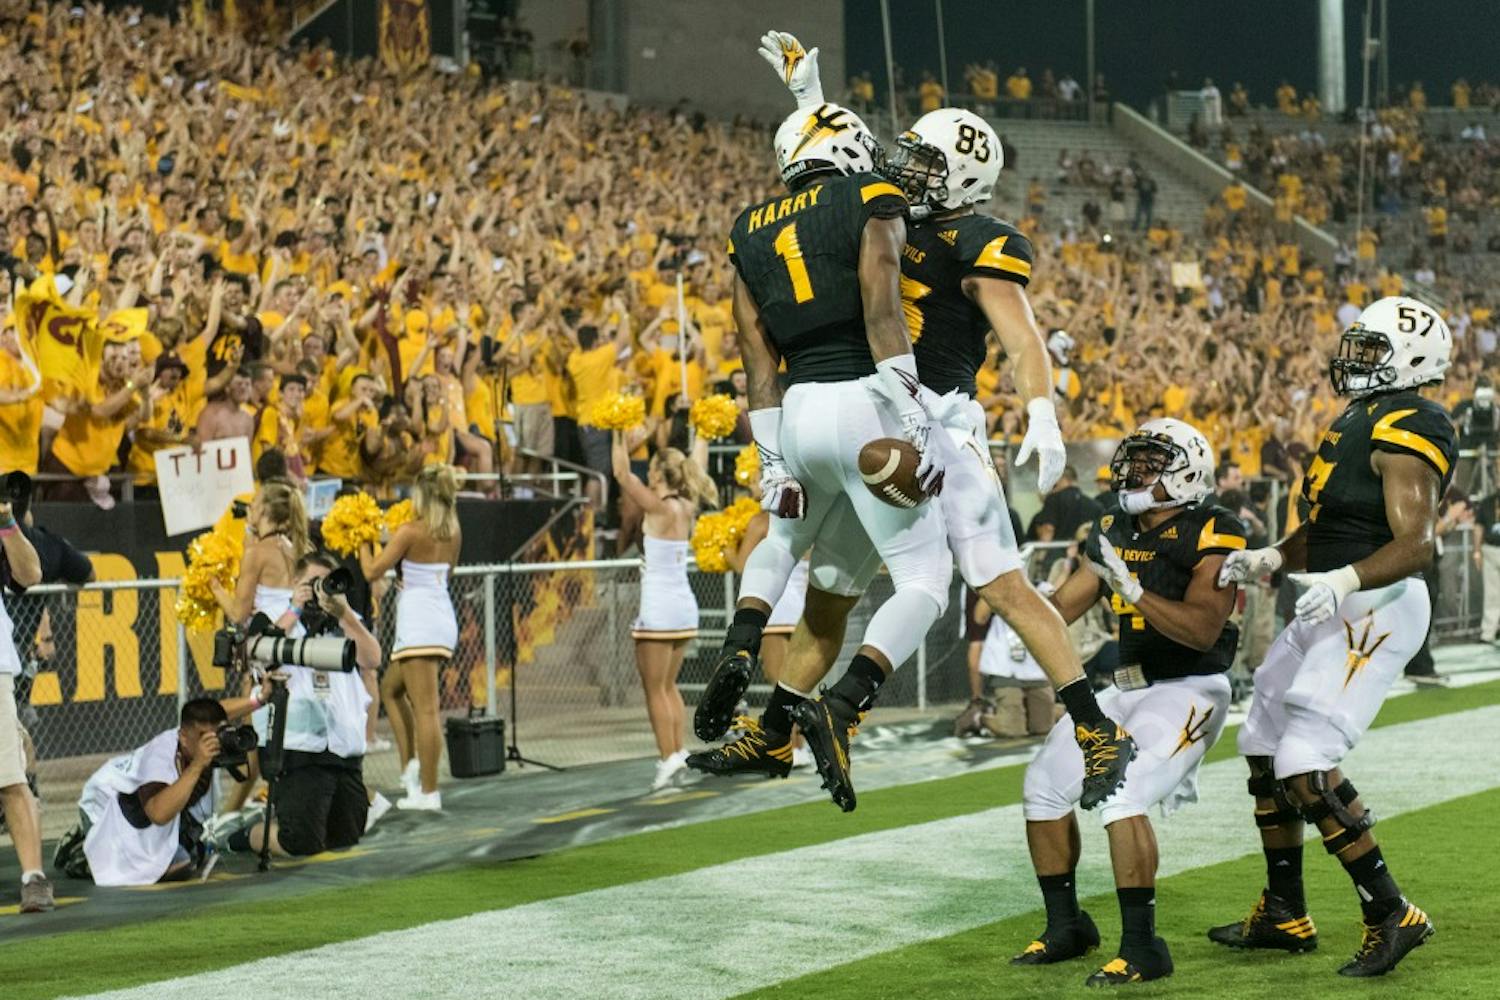 Freshman wide receiver N'Keal Harry celebrates with senior tight-end Kody Kohl after scoring a touchdown in the first quarter against Texas Tech on Sept. 10, 2016 at Sun Devil Stadium,  in Tempe, Arizona.